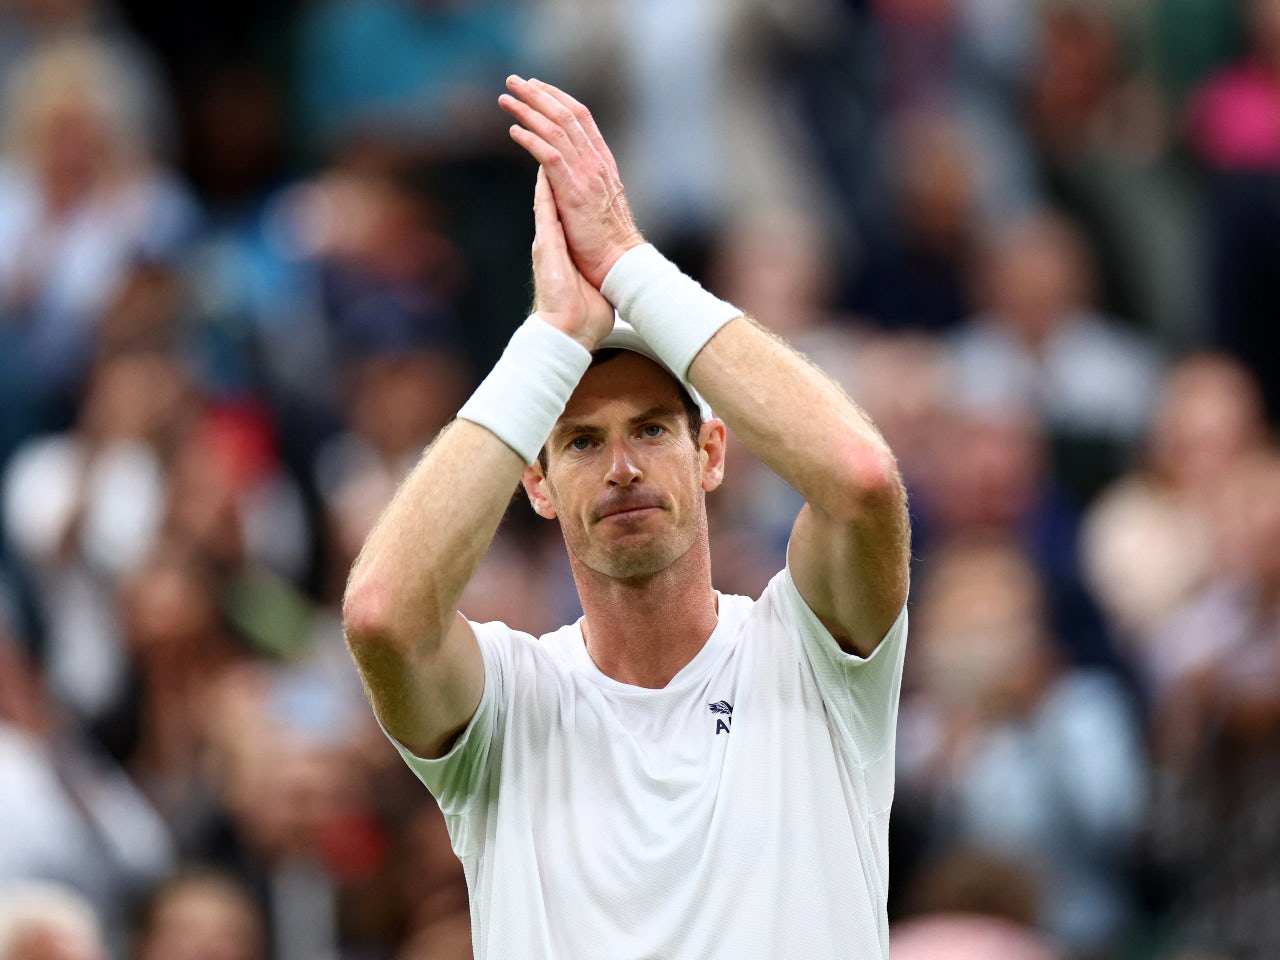 Preview: Andy Murray vs. Tomas Machac - prediction, form, head-to-head